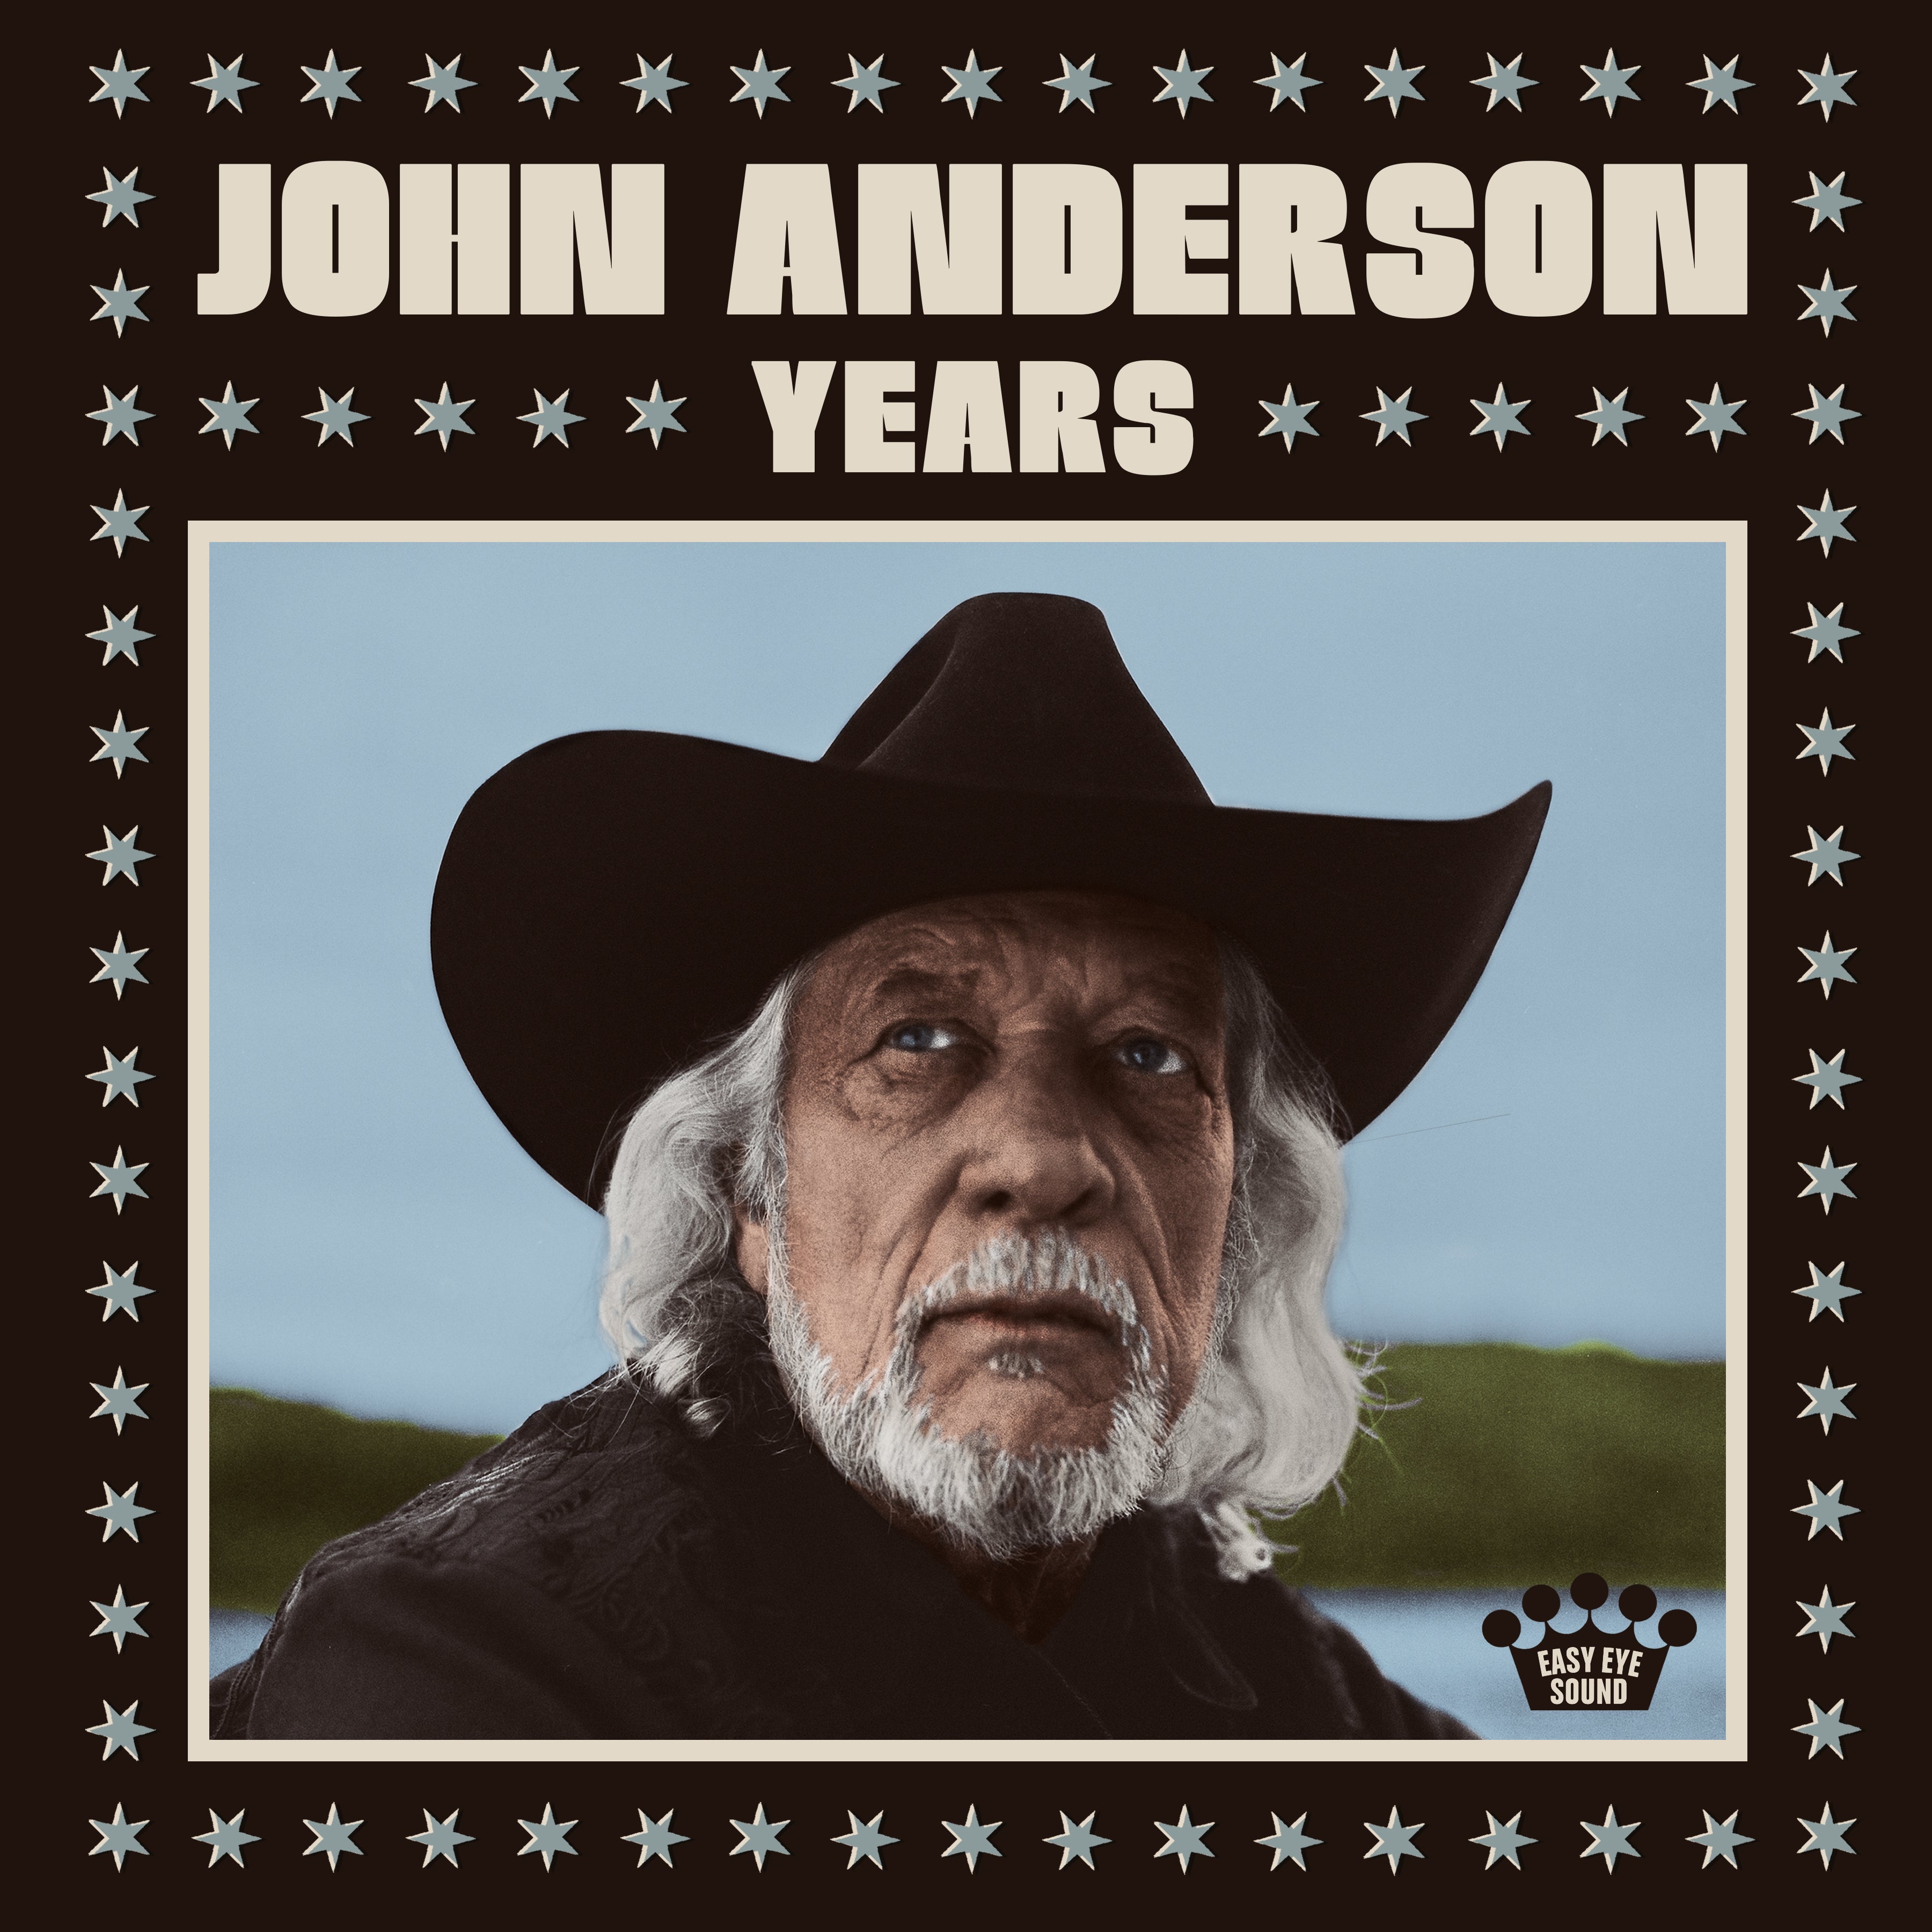 JOHN ANDERSON DEBUTS “TUESDAY I’LL BE GONE” FEATURING BLAKE SHELTON